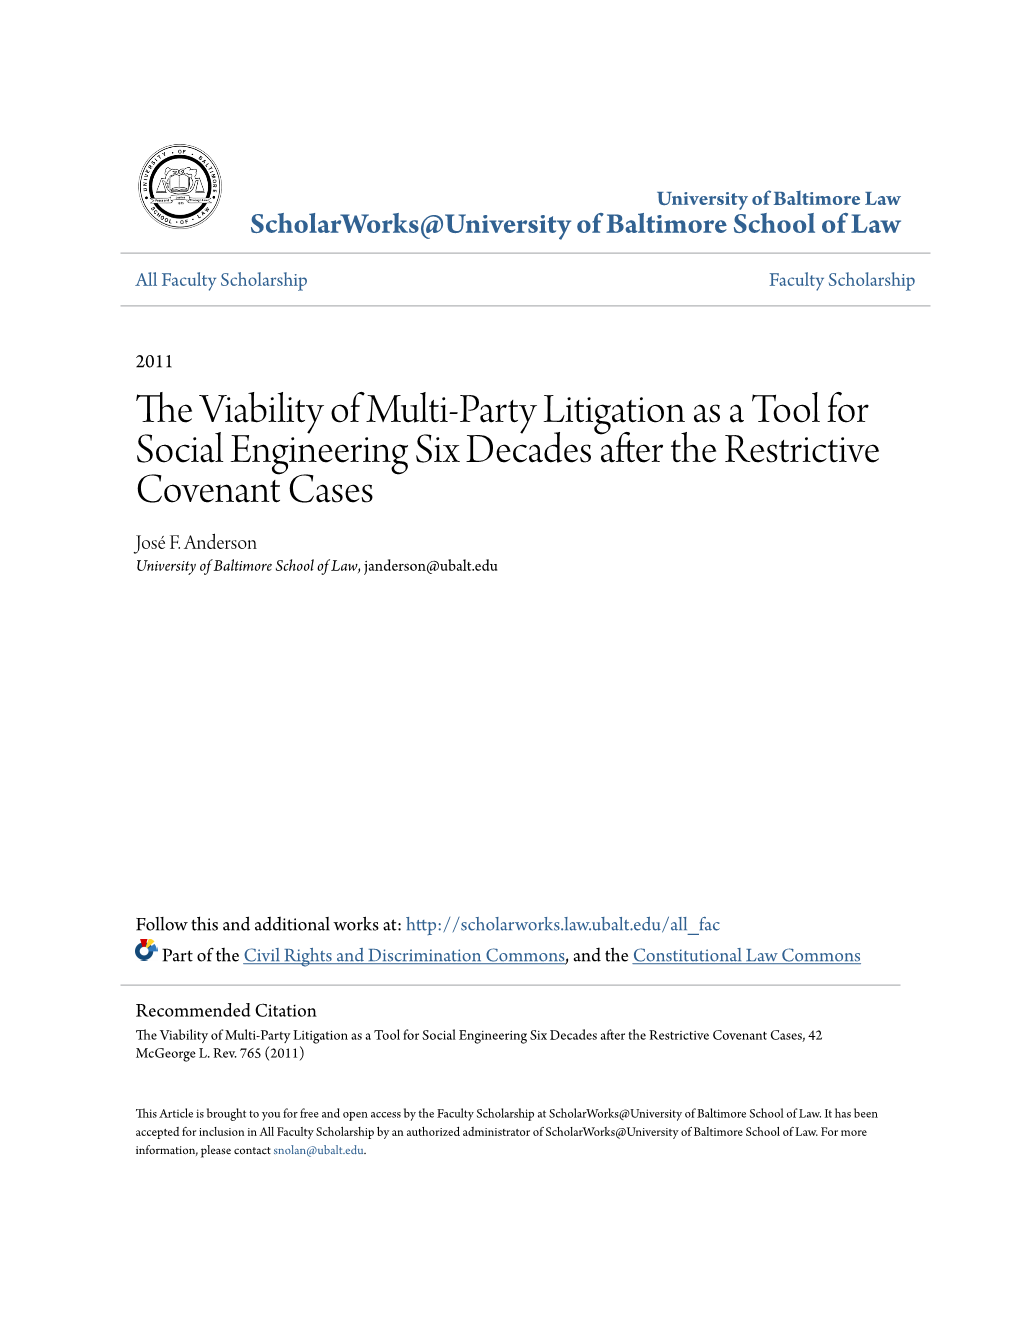 The Viability of Multi-Party Litigation As a Tool for Social Engineering Six Decades After the Restrictive Covenant Cases